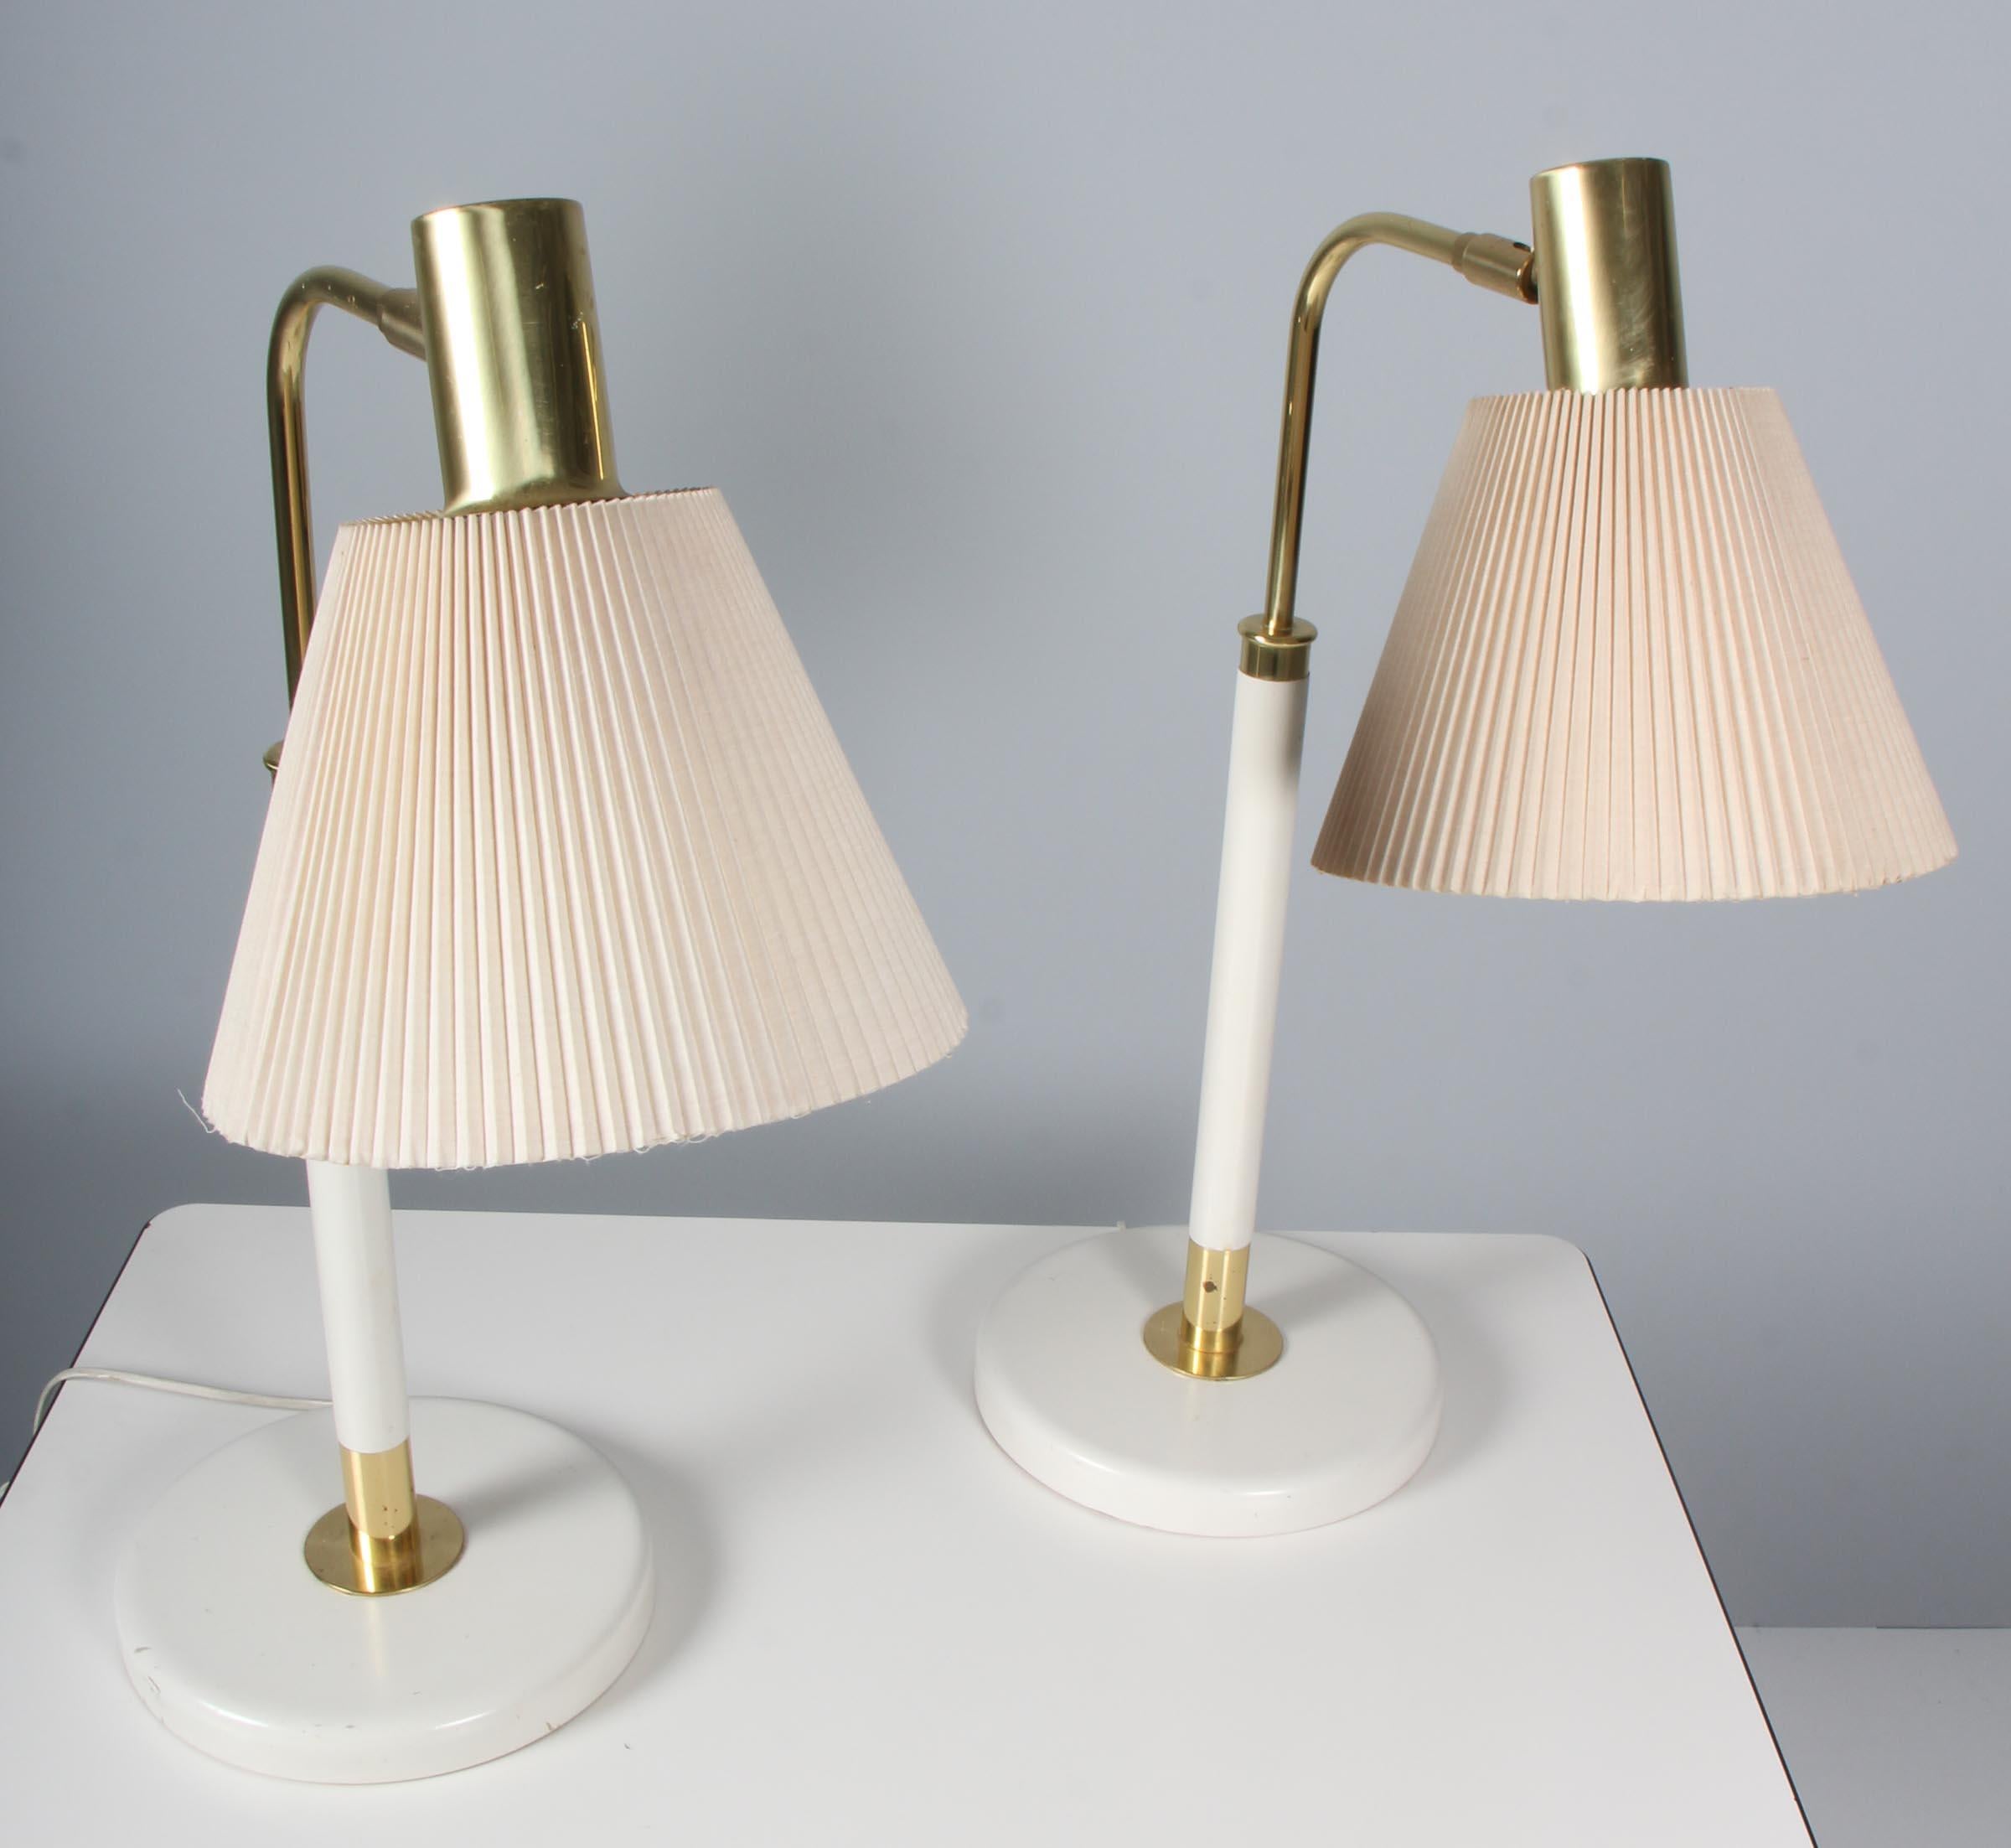 Karin Mobring, Thomas Jelinek: pair of table lamps in brass and white laquered wood. 

Shades with minor damages.

Model Stockholm, Made by Ikea in the 1960s.